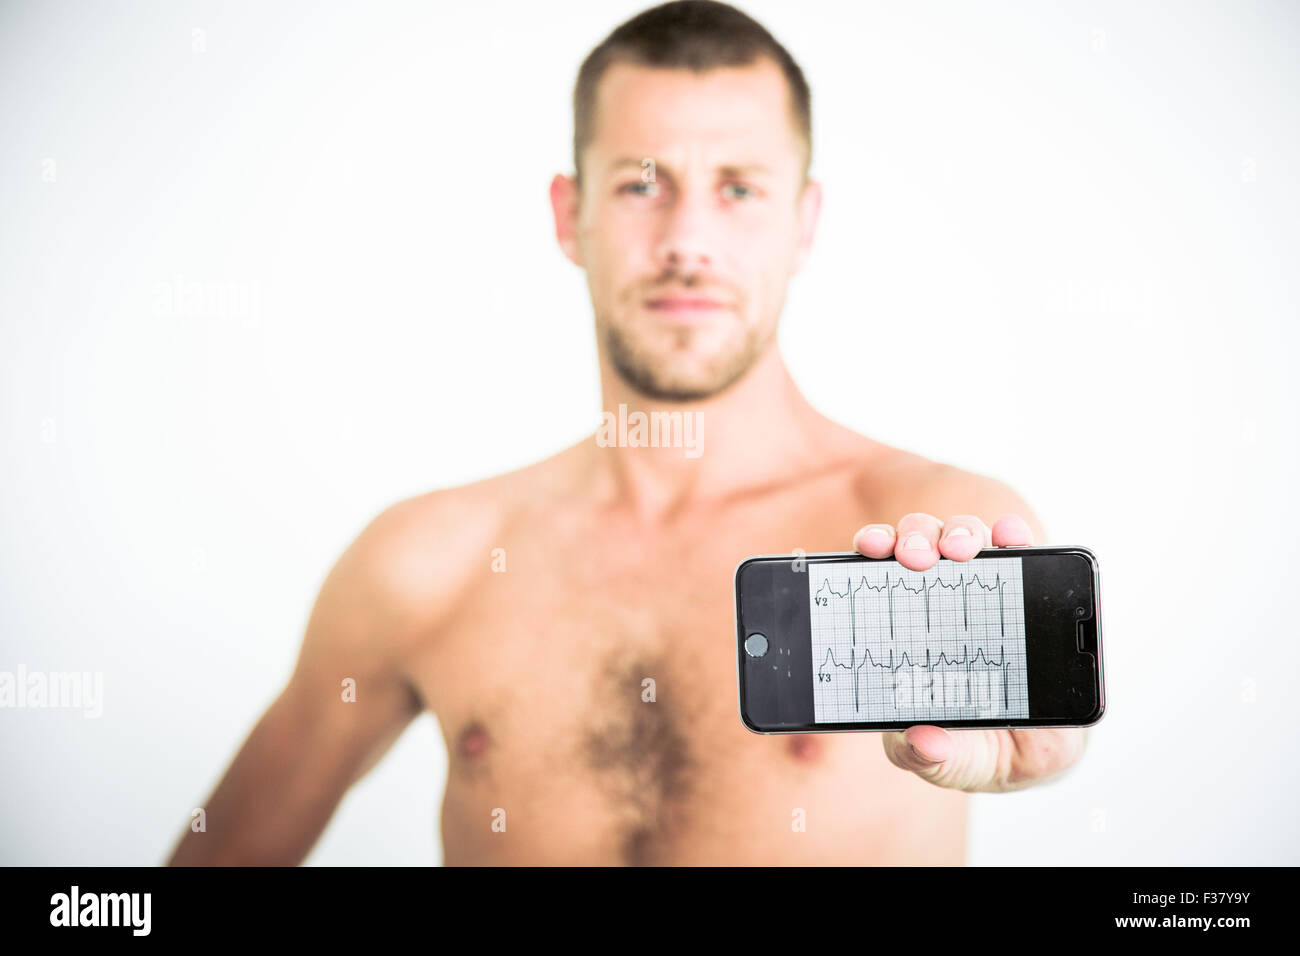 Man using health application on his Iphone. Stock Photo